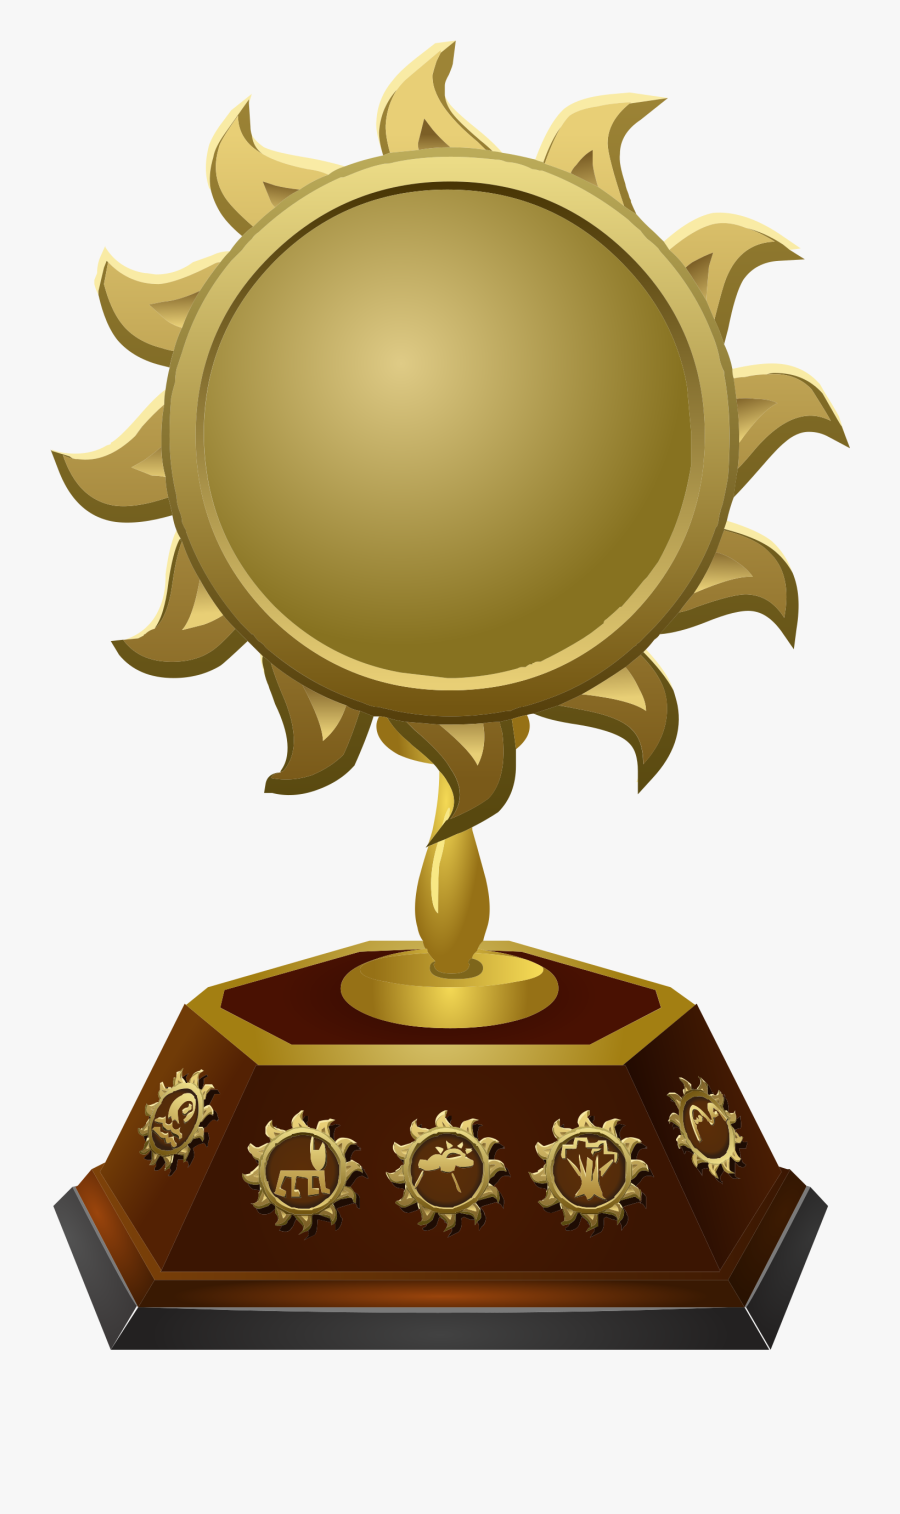 Golden Shape Star Drawing Cup Free Download Image Clipart - Awards And Honours, Transparent Clipart